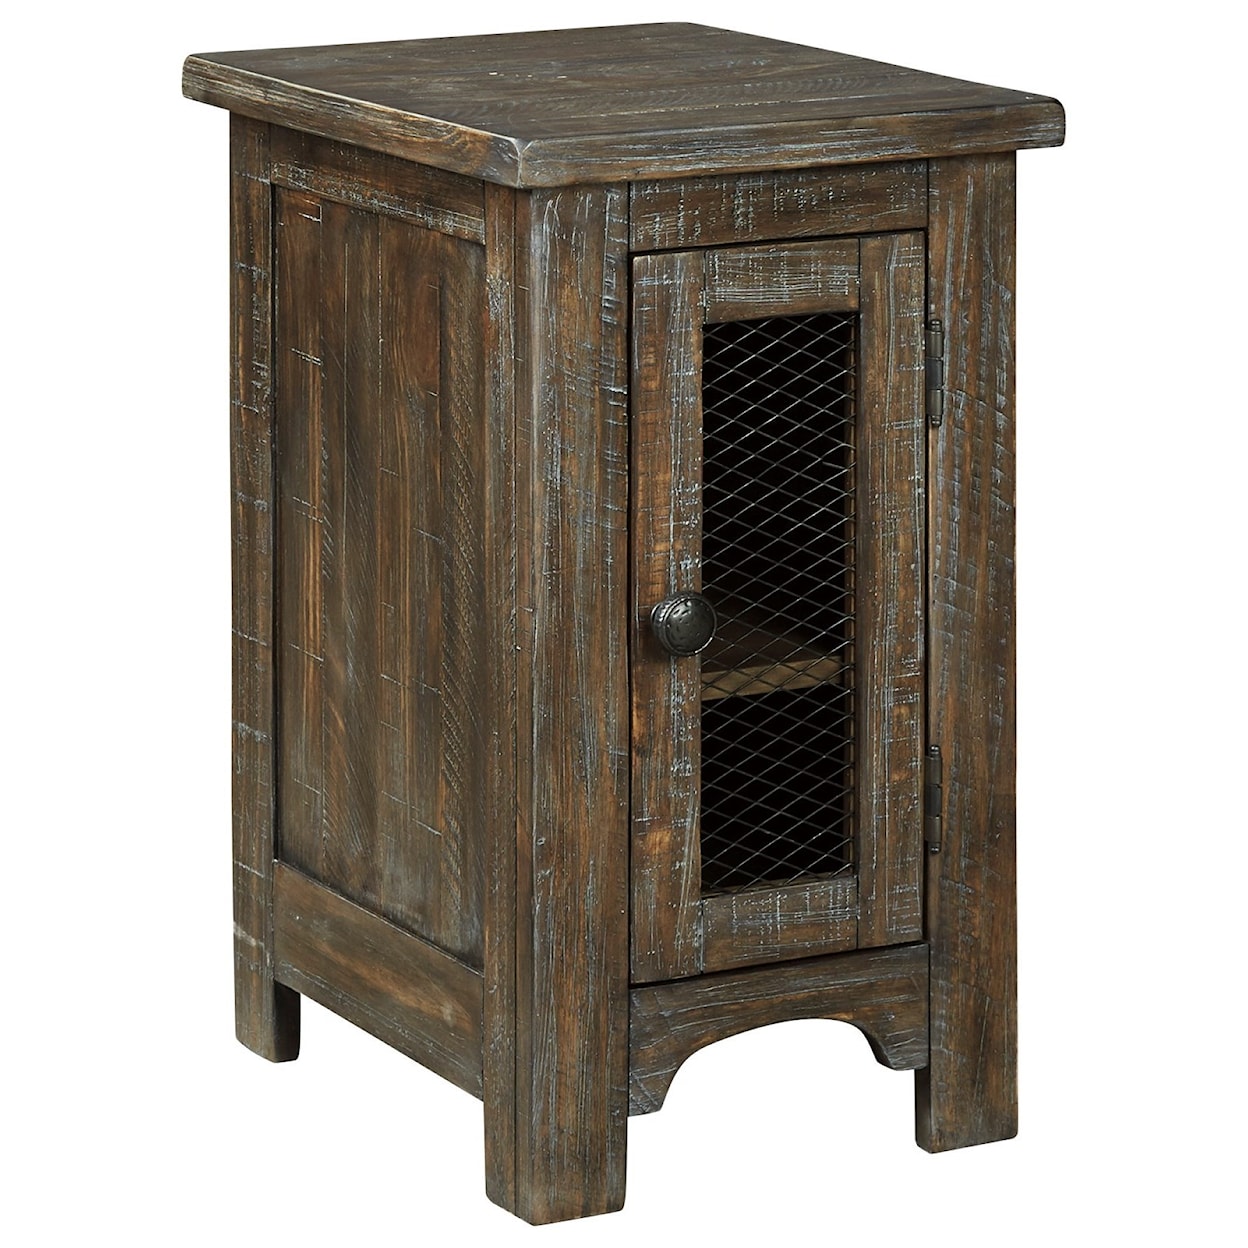 Signature Design by Ashley Danell Ridge Chair Side End Table